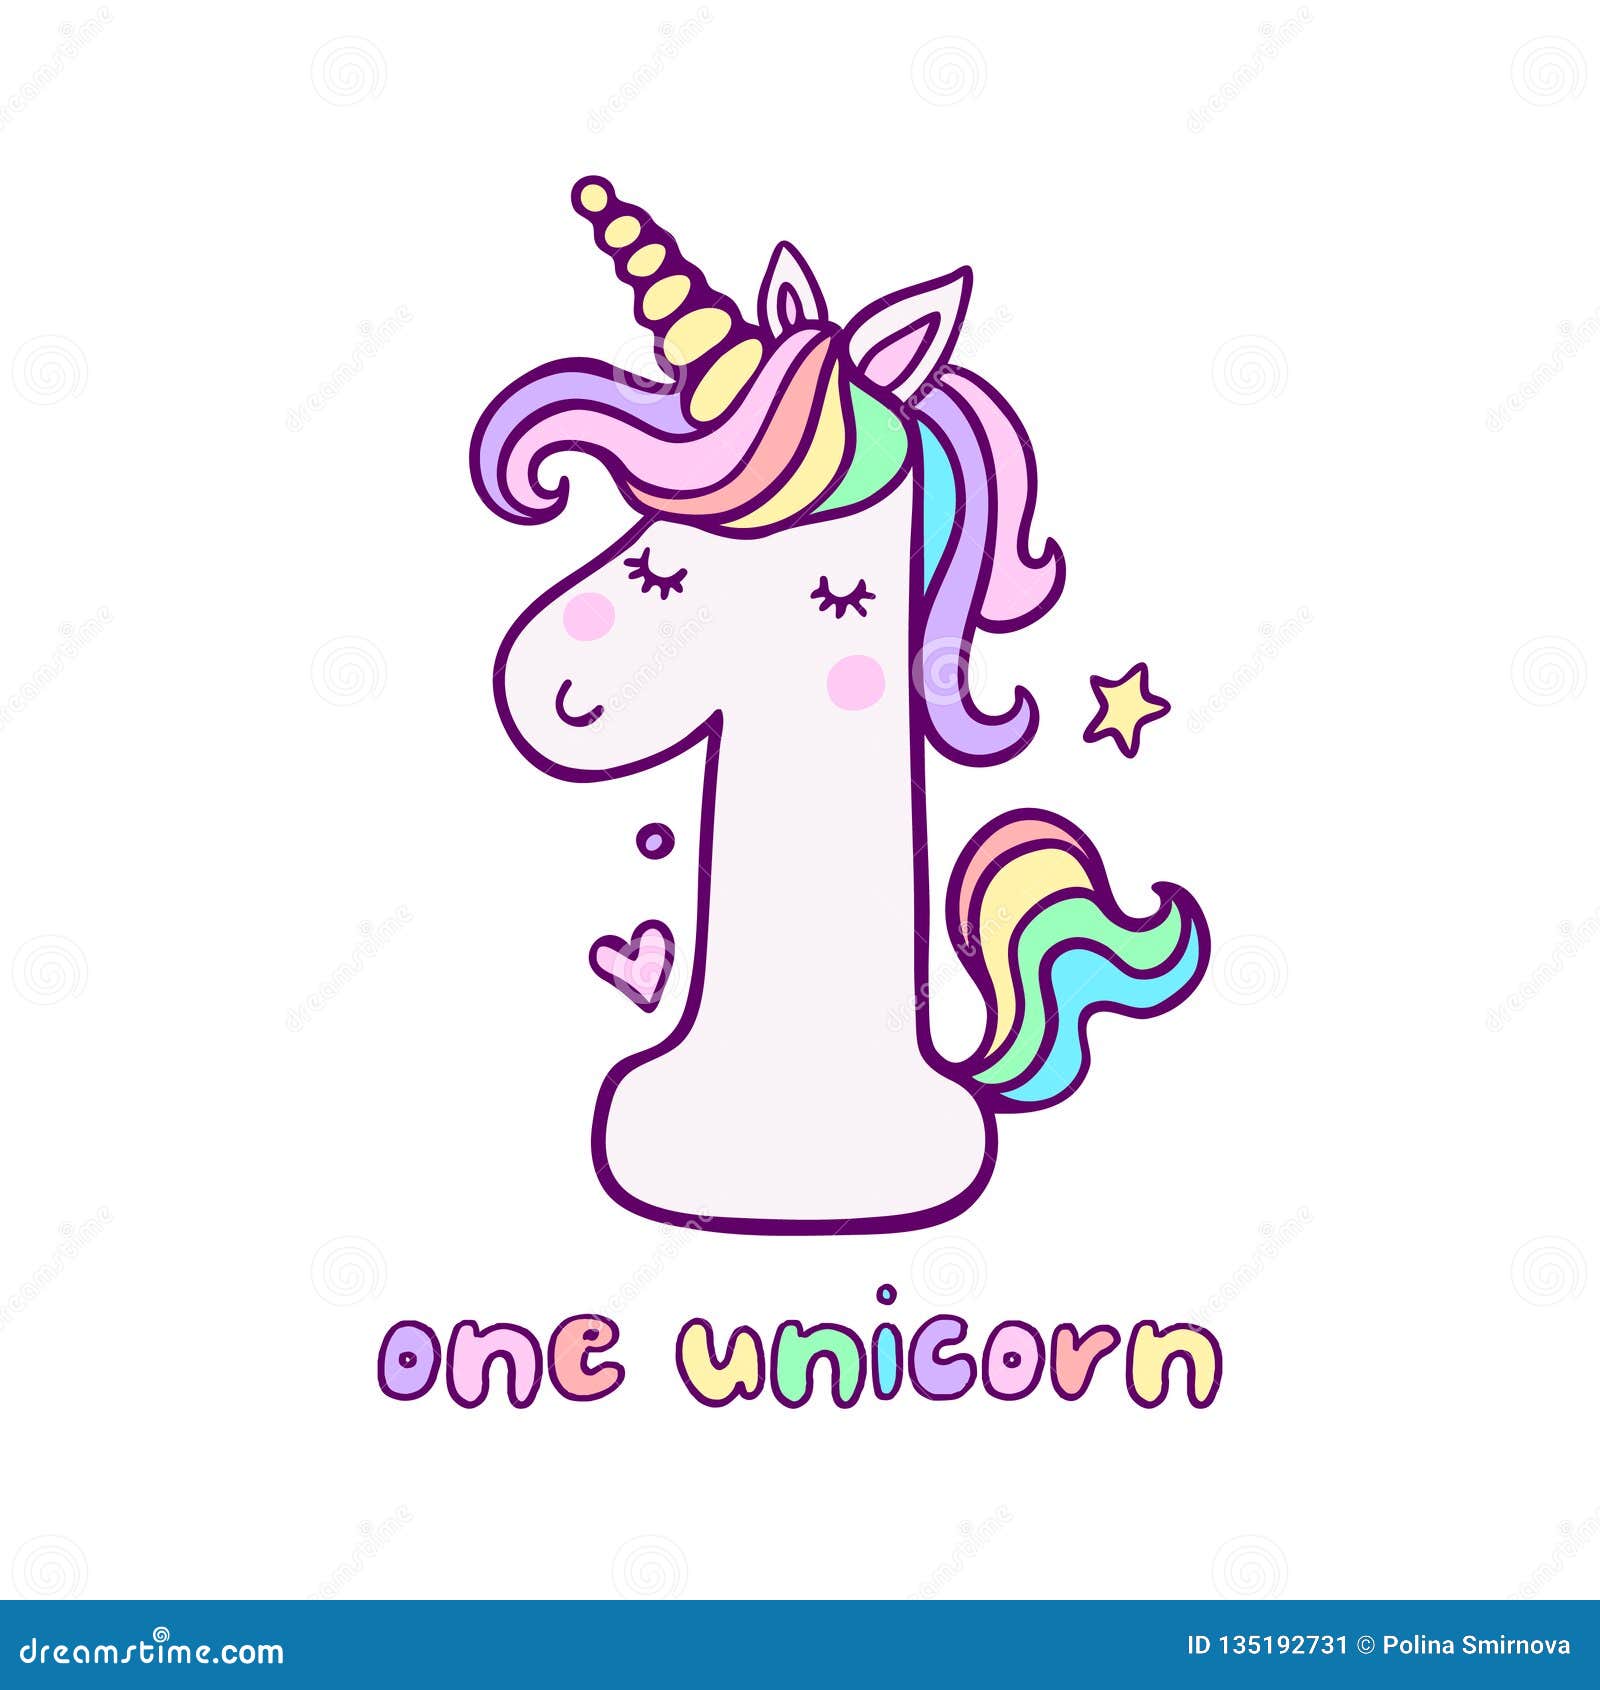 cute number one unicorn character vector illustration stock vector